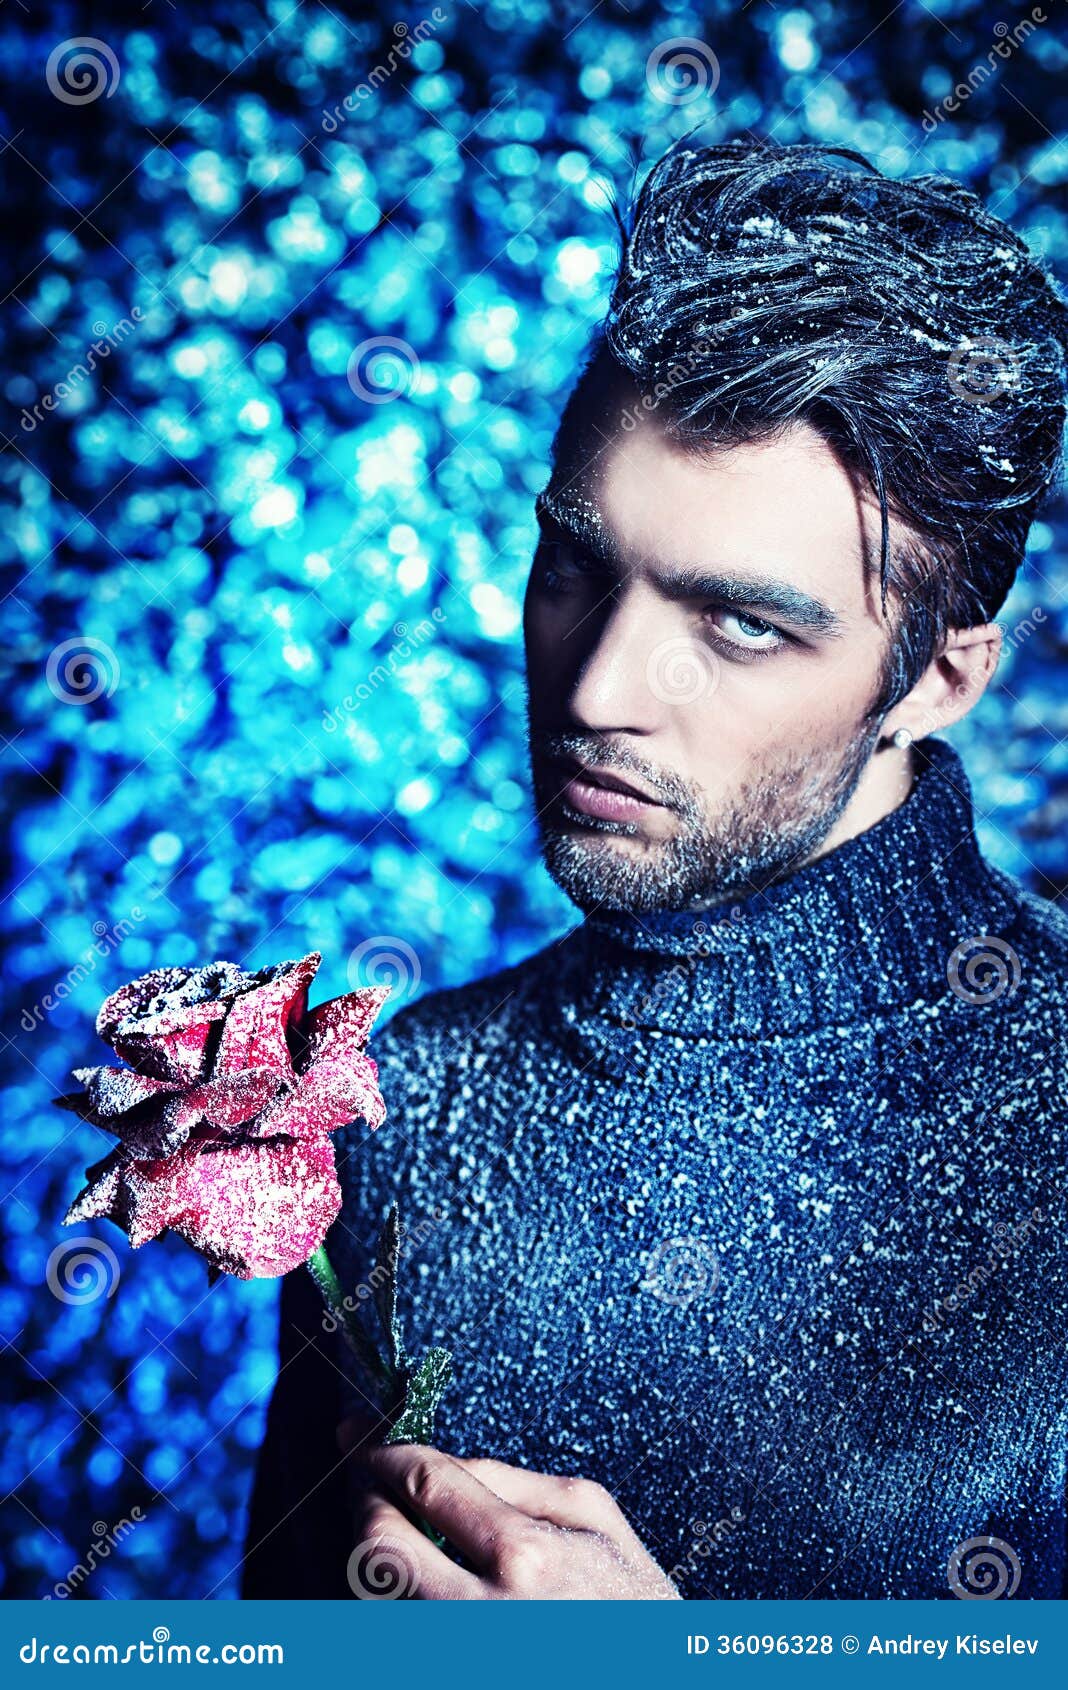 <b>Cold heart</b> - cold-heart-portrait-handsome-man-dressed-winter-clothes-holding-rose-covered-snow-36096328